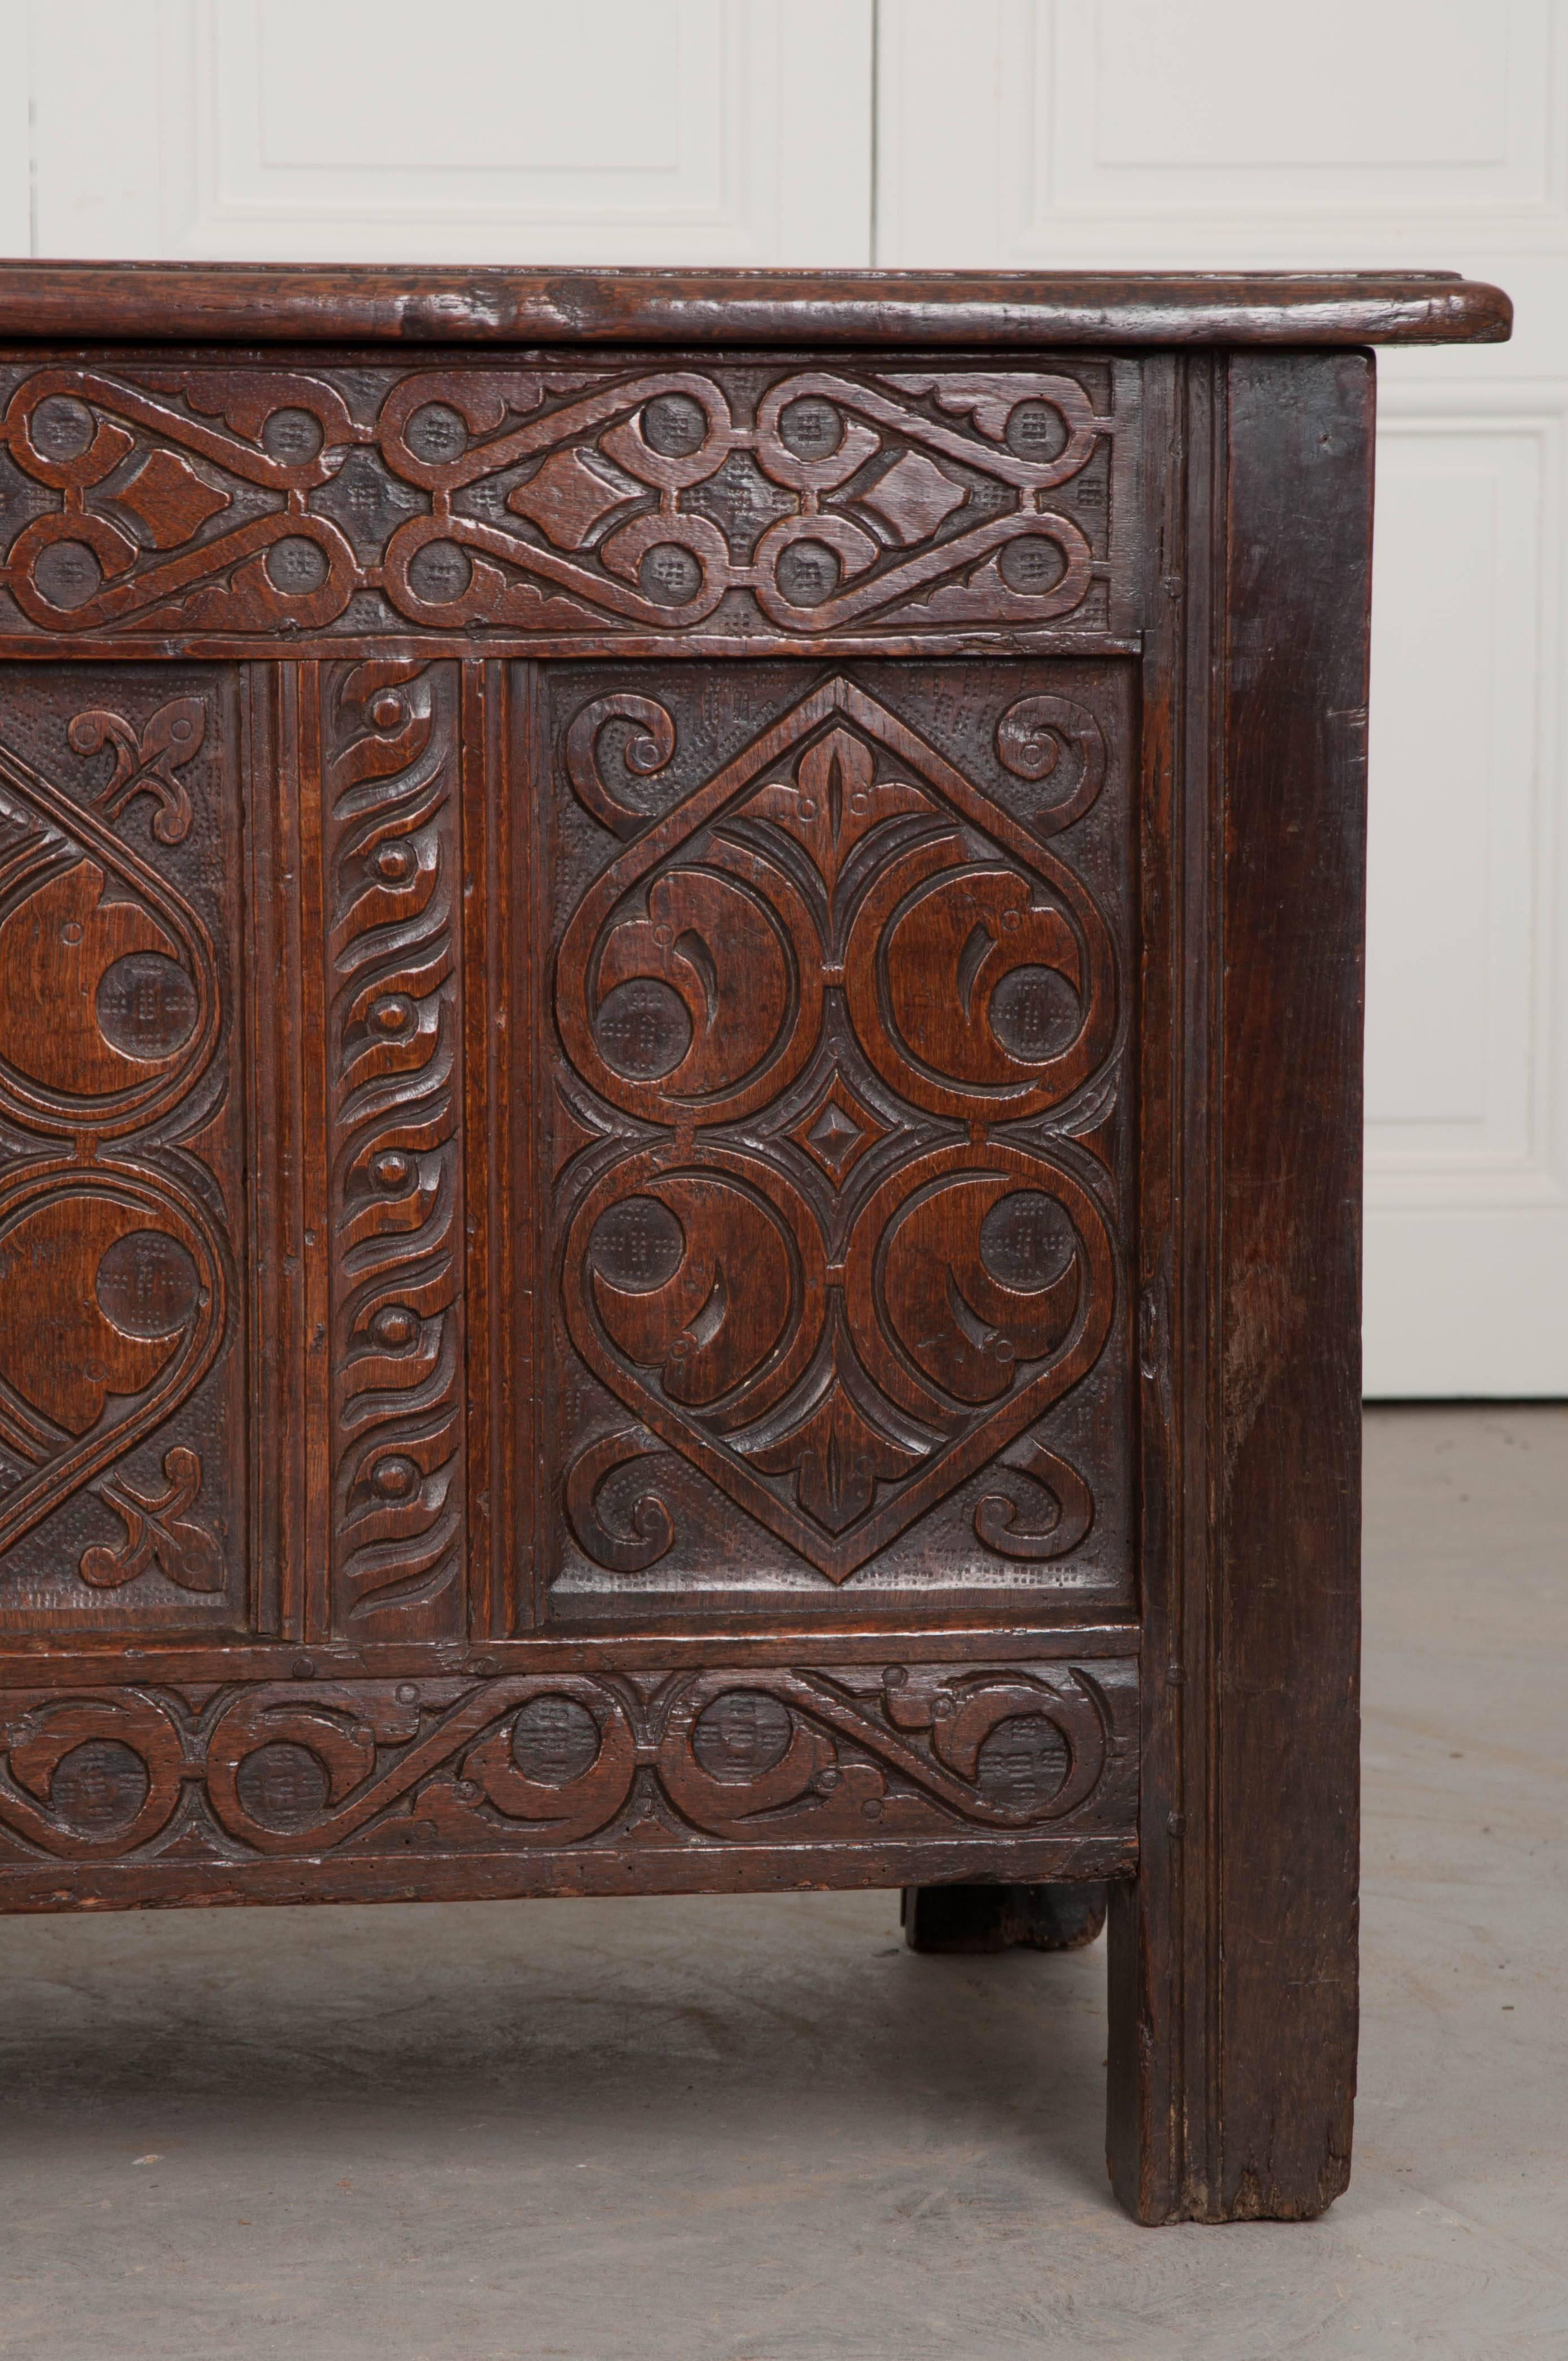 A gorgeous coffer or trunk from the late 1700s, England. The façade has four panels that have been meticulously carved into patterns of scrolls, hearts, leaves, and geometric shapes. The lid and sides are designed with more simple, framed panels.